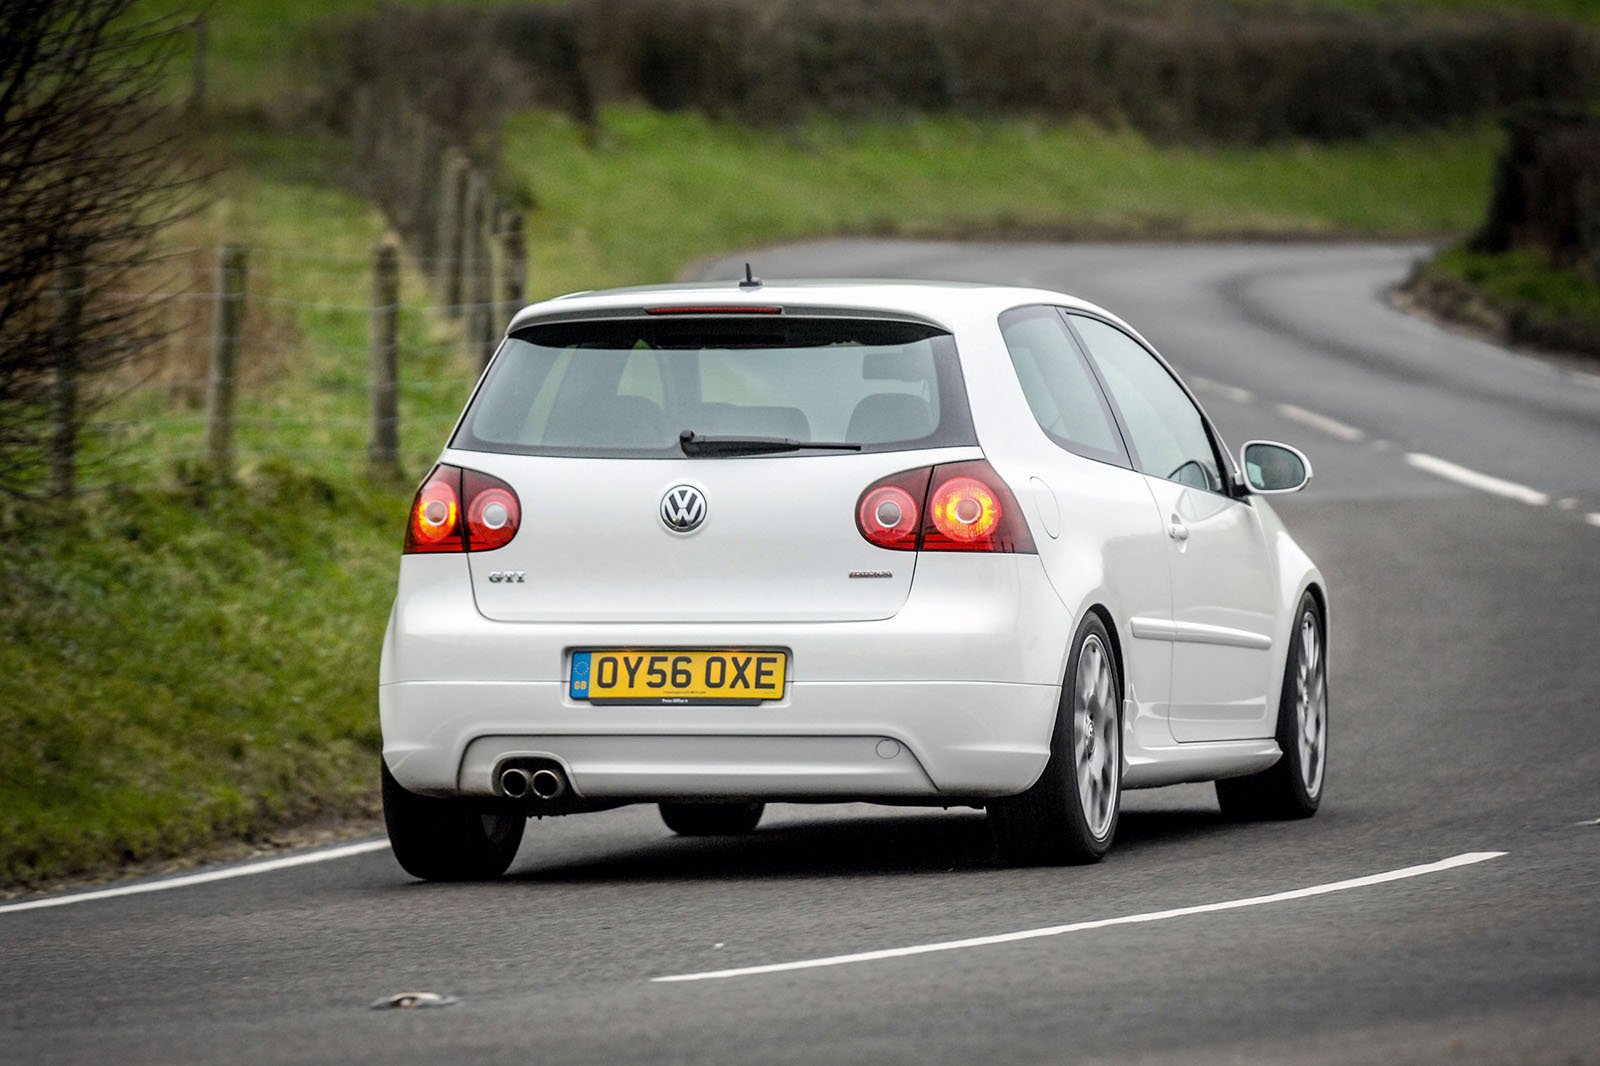 Nearly new buying guide: Volkswagen Golf Mk7